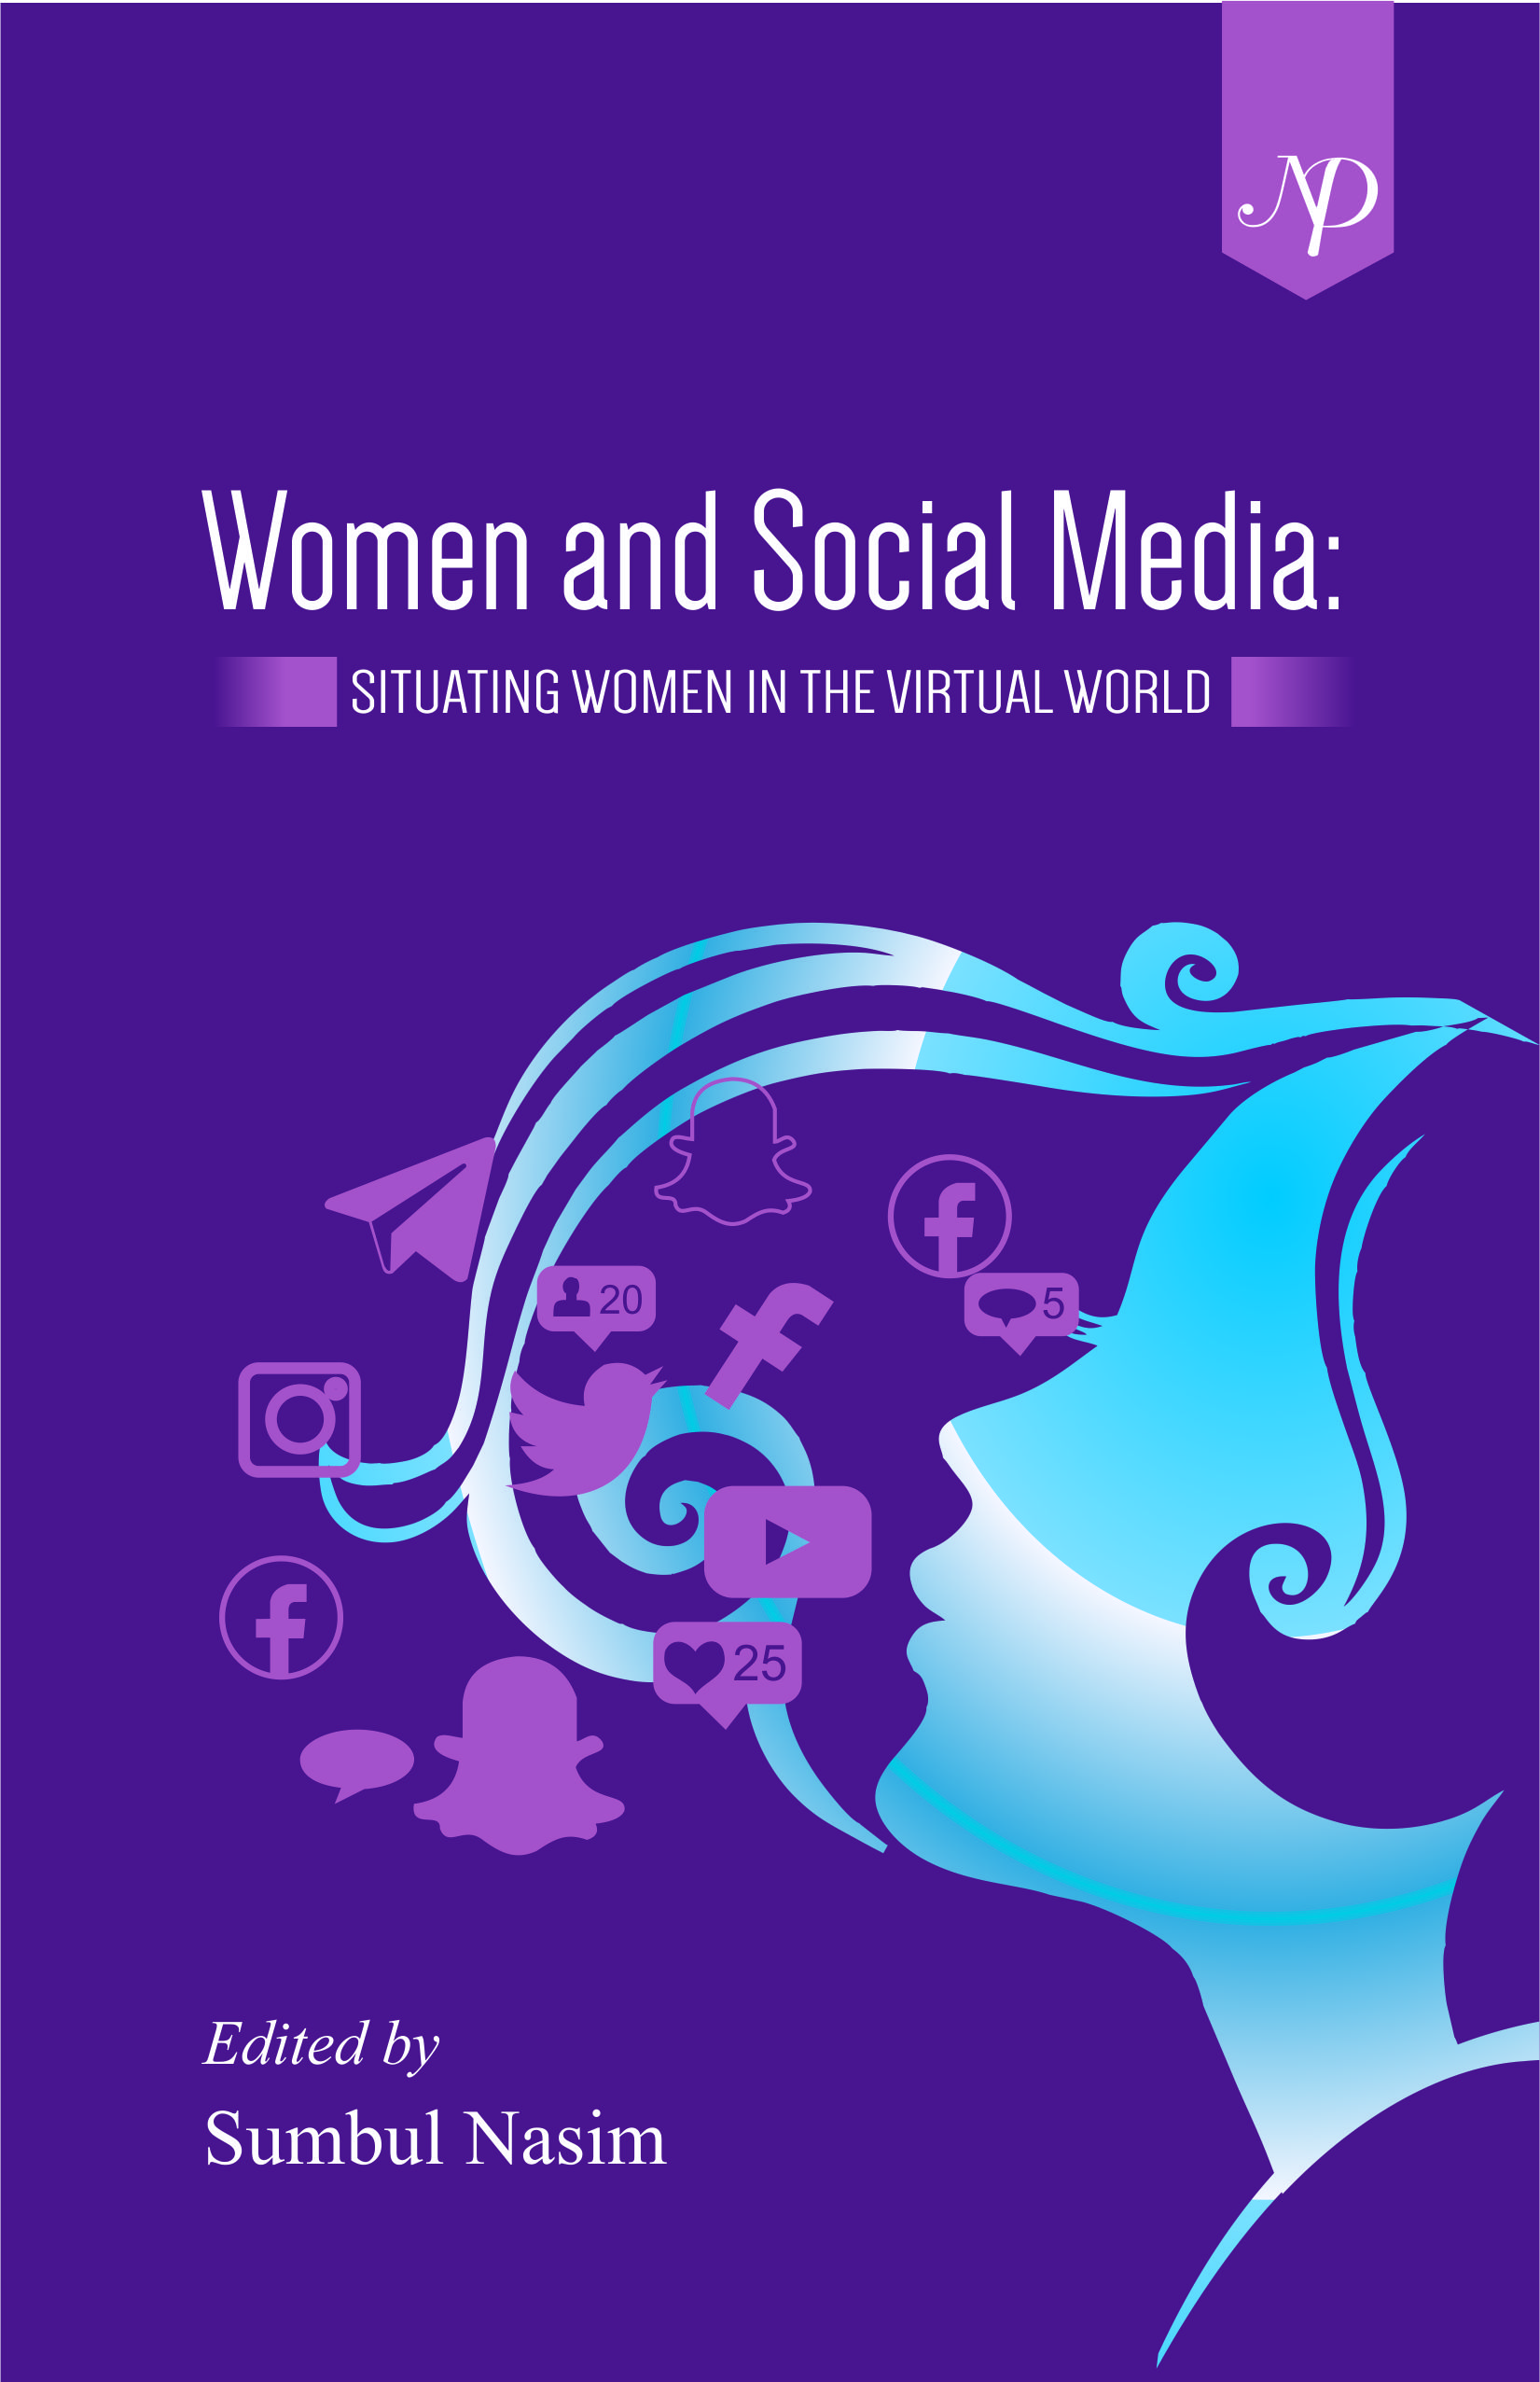 Women and Social Media Situating Women in the Virtual World Cover.jpg